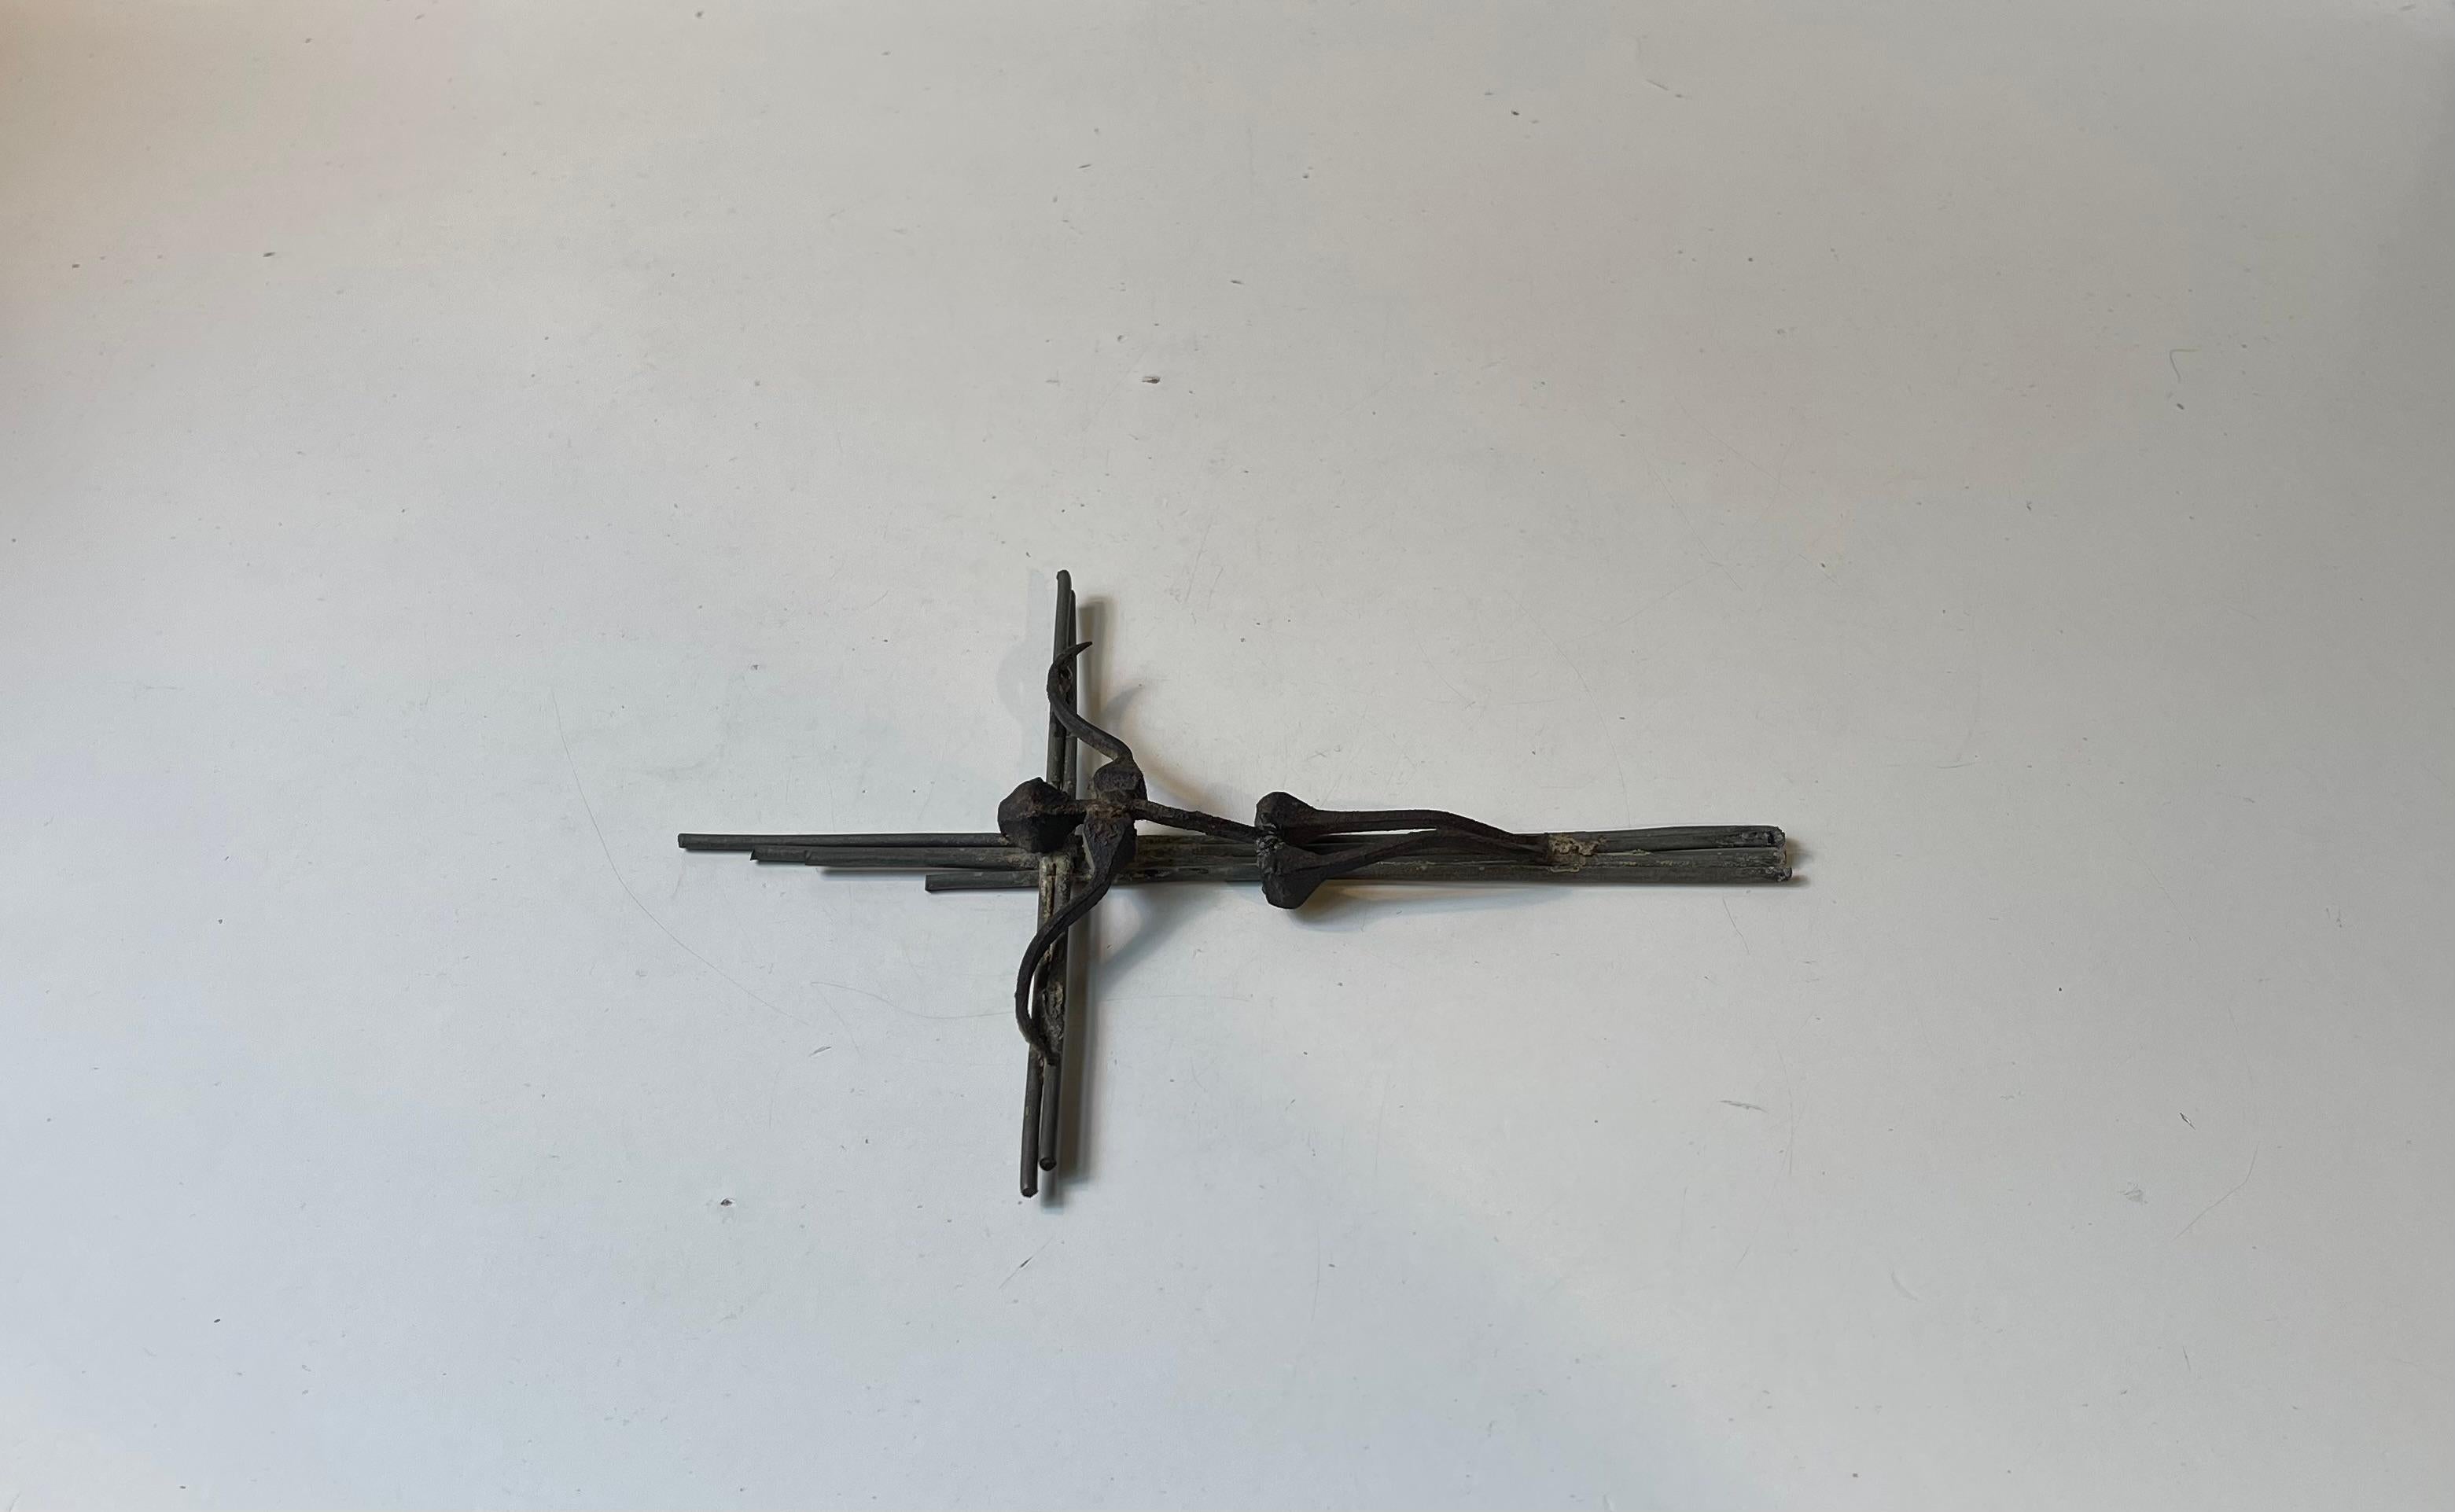 Vintage Brutalist Art Wall Crucifix in Iron Nails & Brass In Fair Condition For Sale In Esbjerg, DK